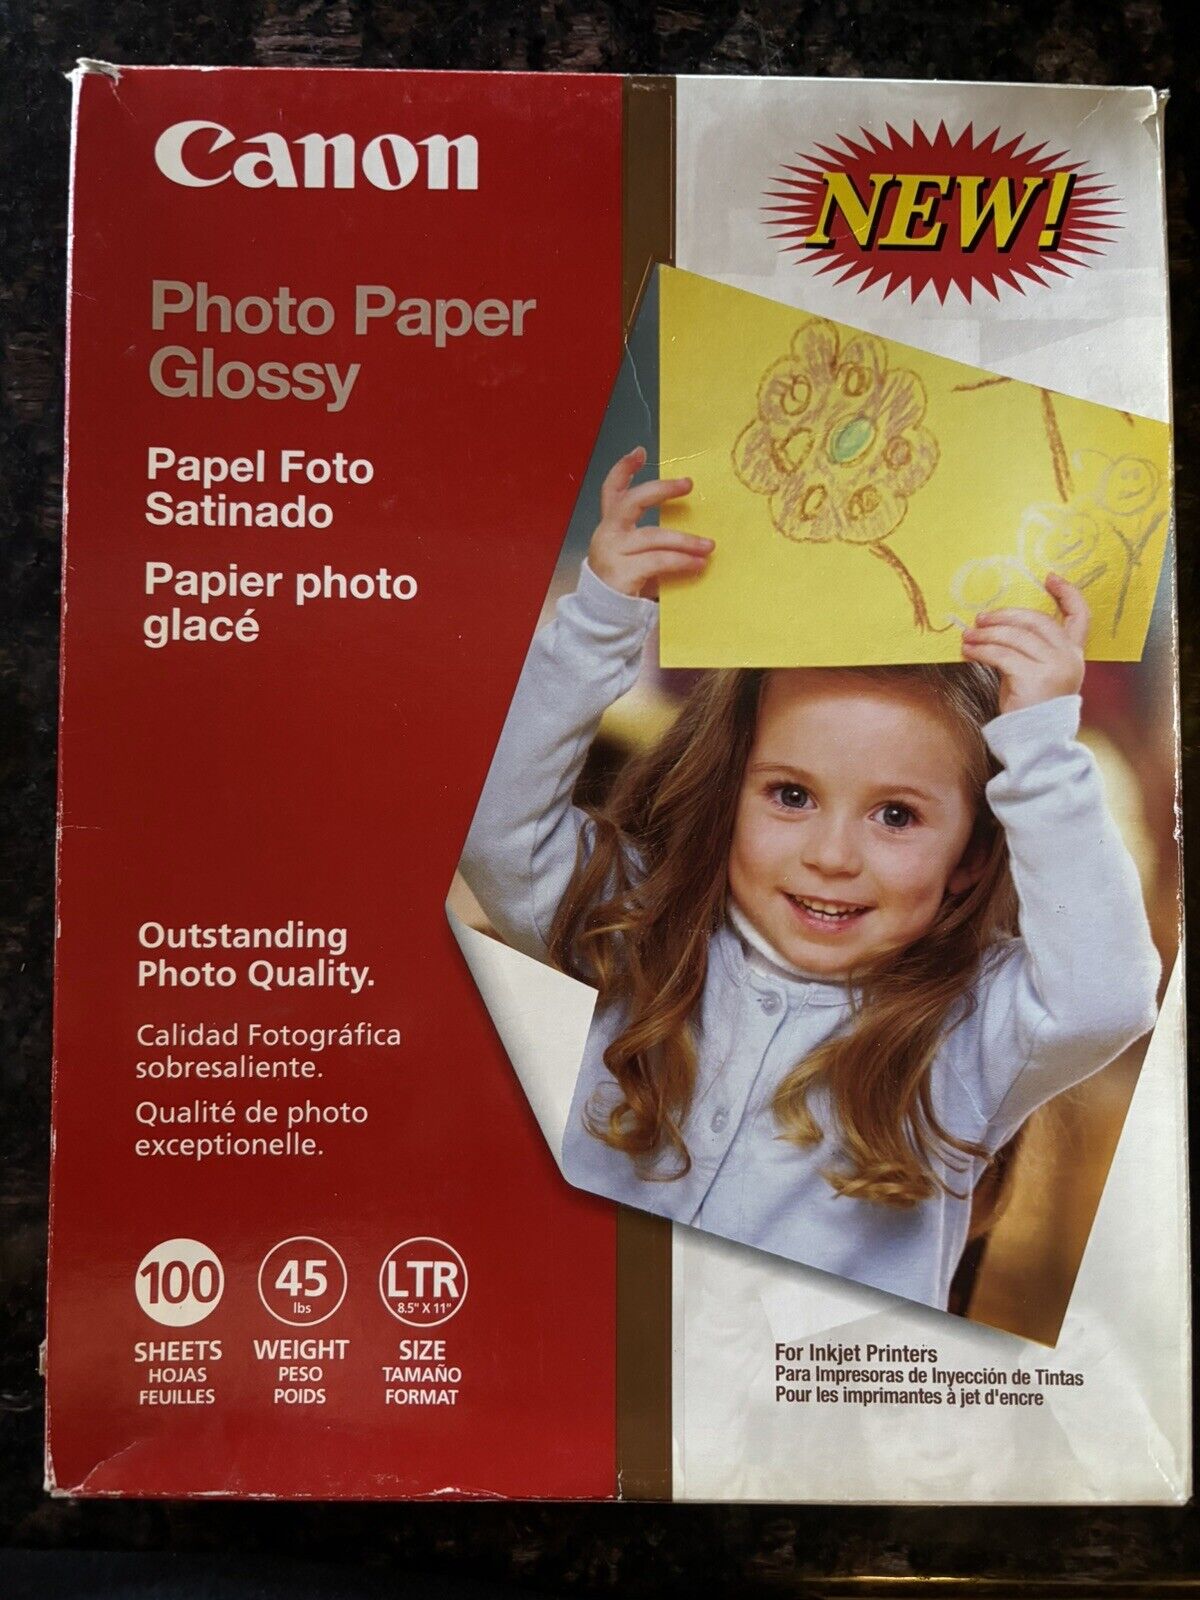 GENUINE CANON PHOTO INKJET PRINTER PAPER GLOSSY 100 SHEETS 8.5”x 11” *UNSEALED*